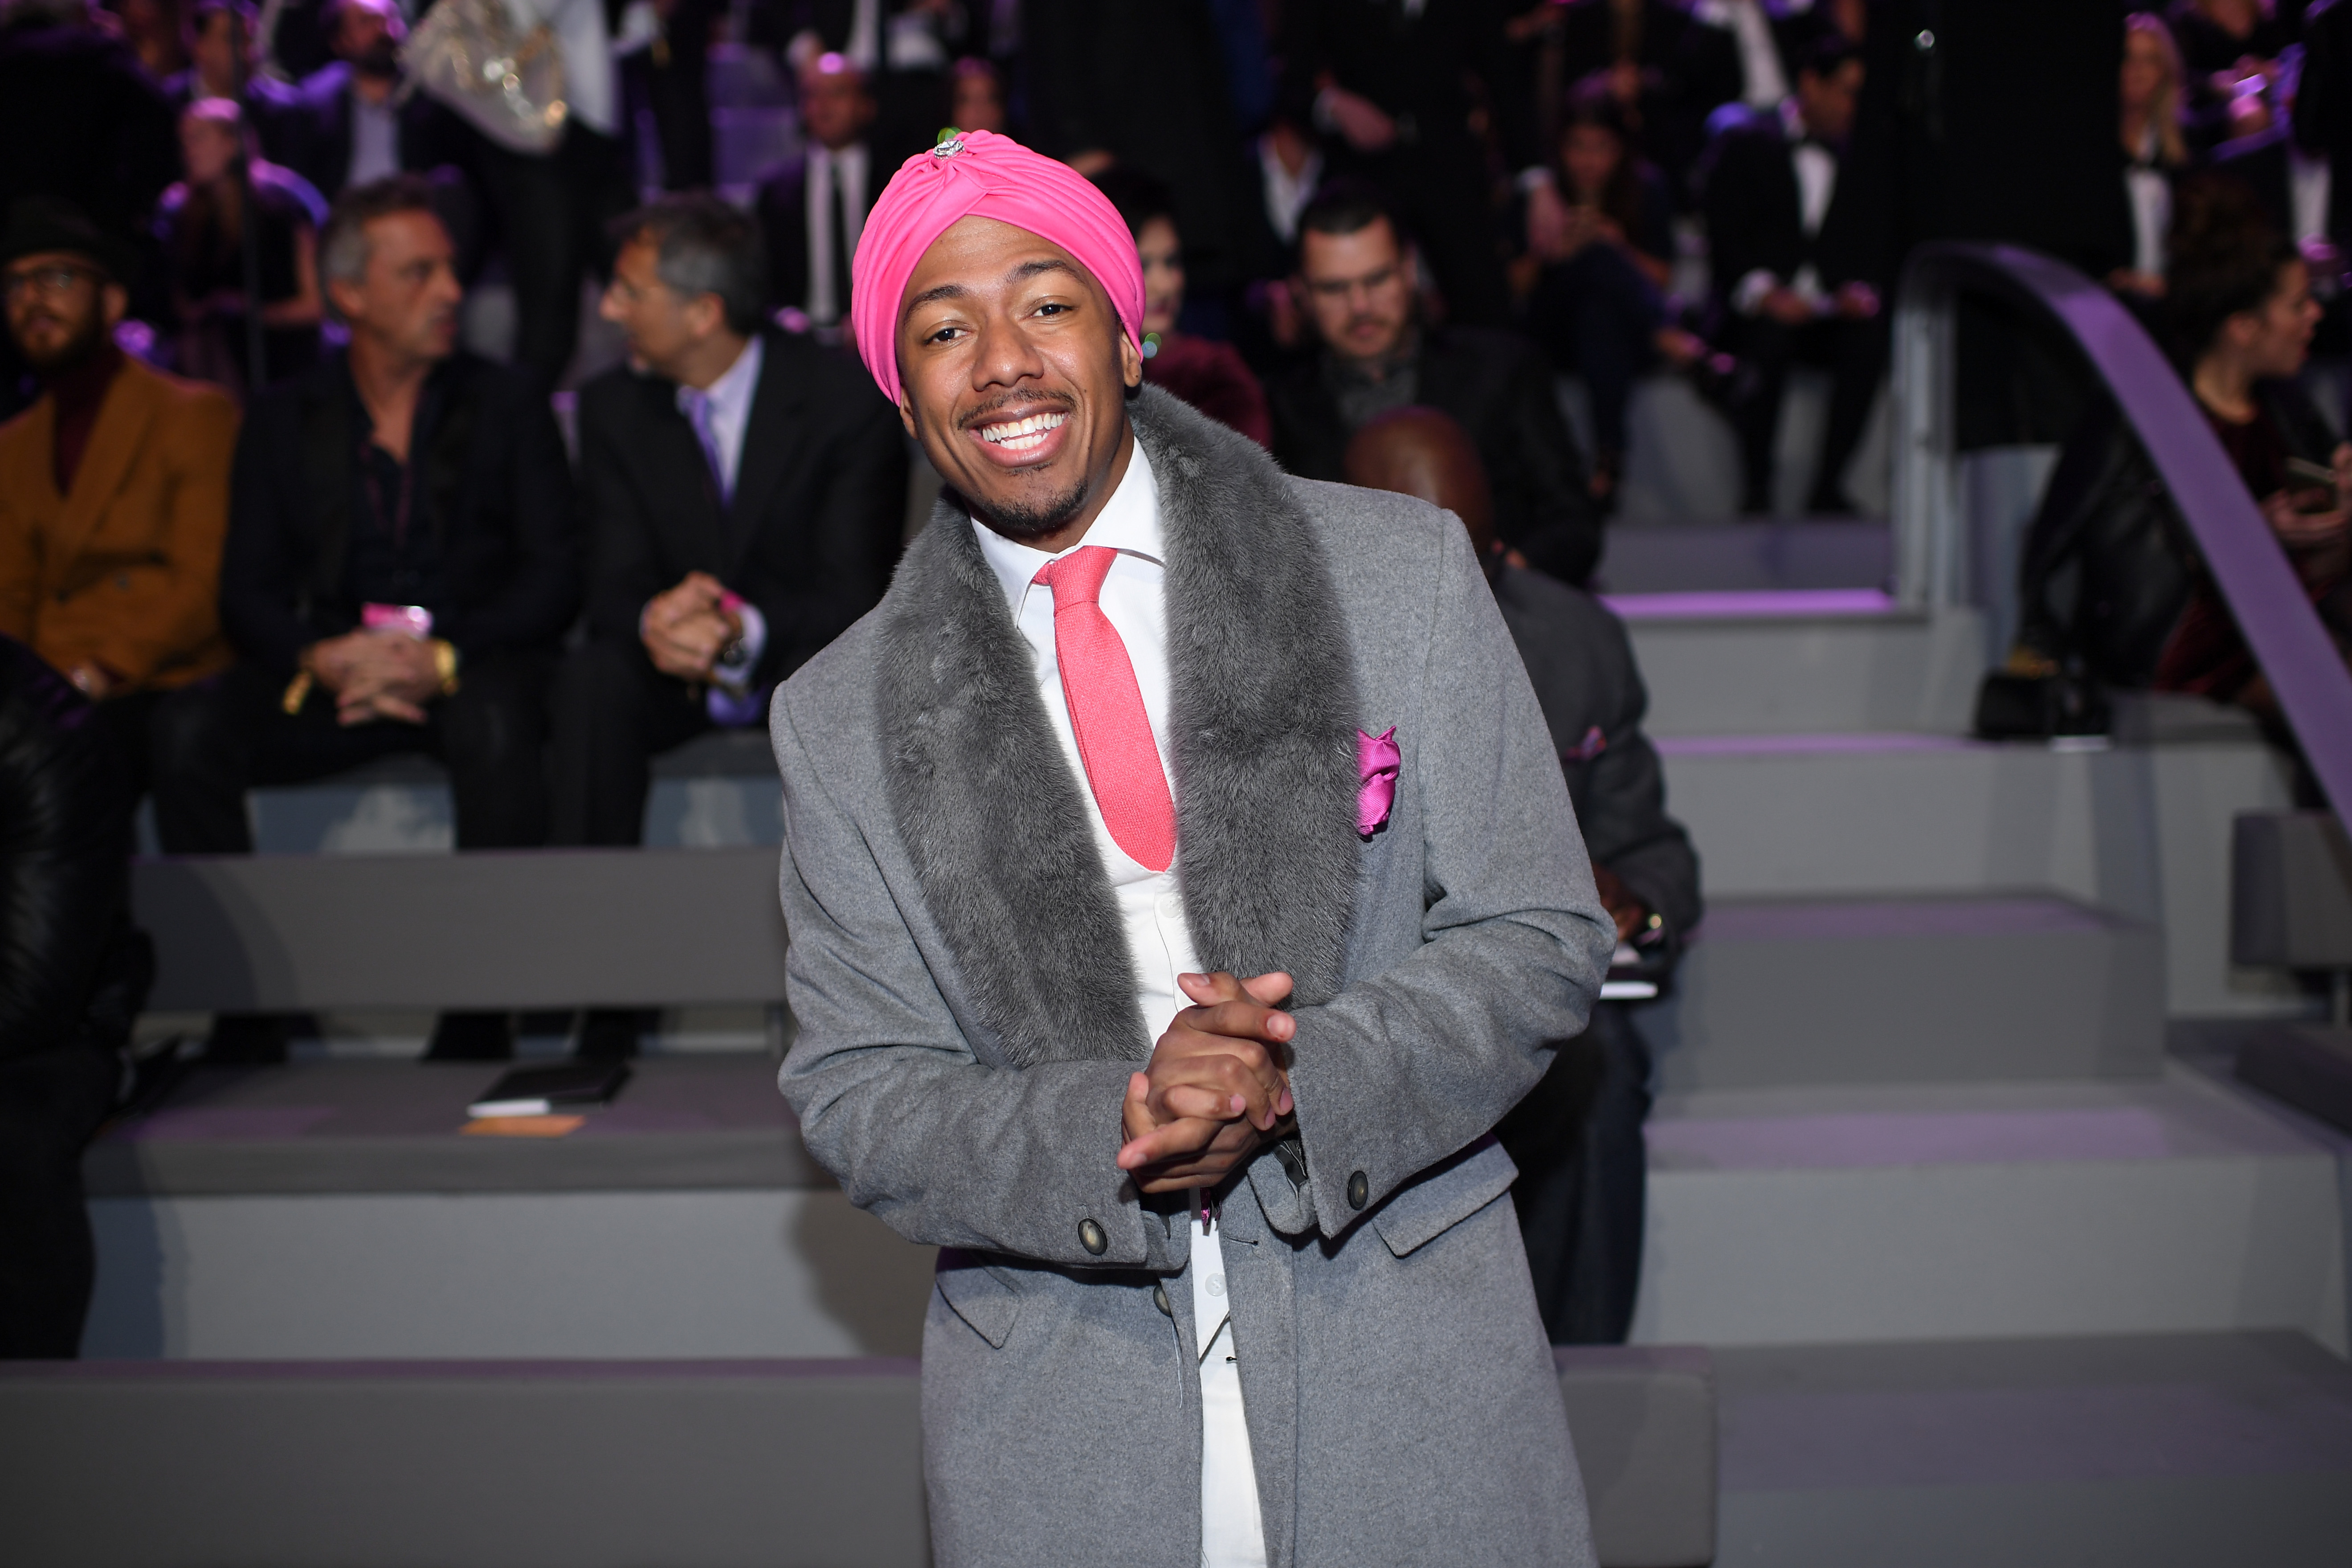 Nick Cannon attends the Victoria's Secret Fashion Show on November 30, 2016 in Paris, France. (Photo by Dimitrios Kambouris/Getty Images for Victoria's Secret)